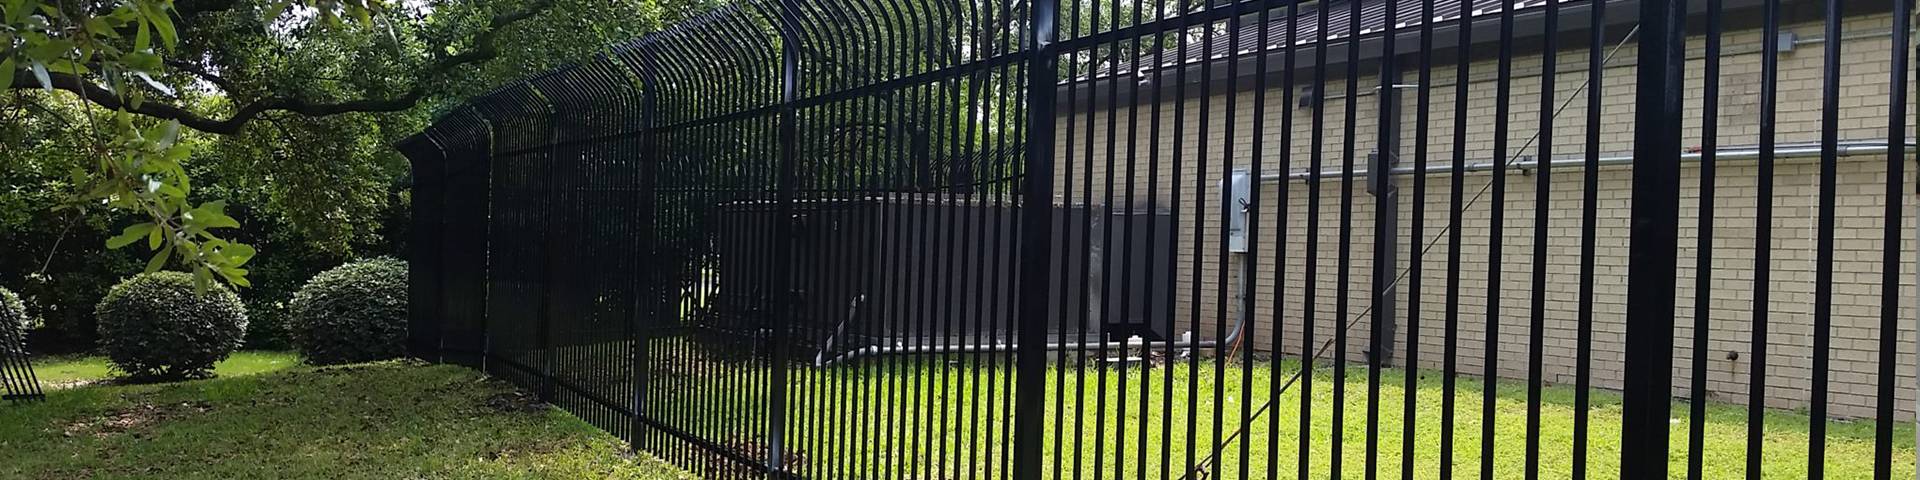 Ornamental steel fence are installed for the perimeter safety of the courtyard.